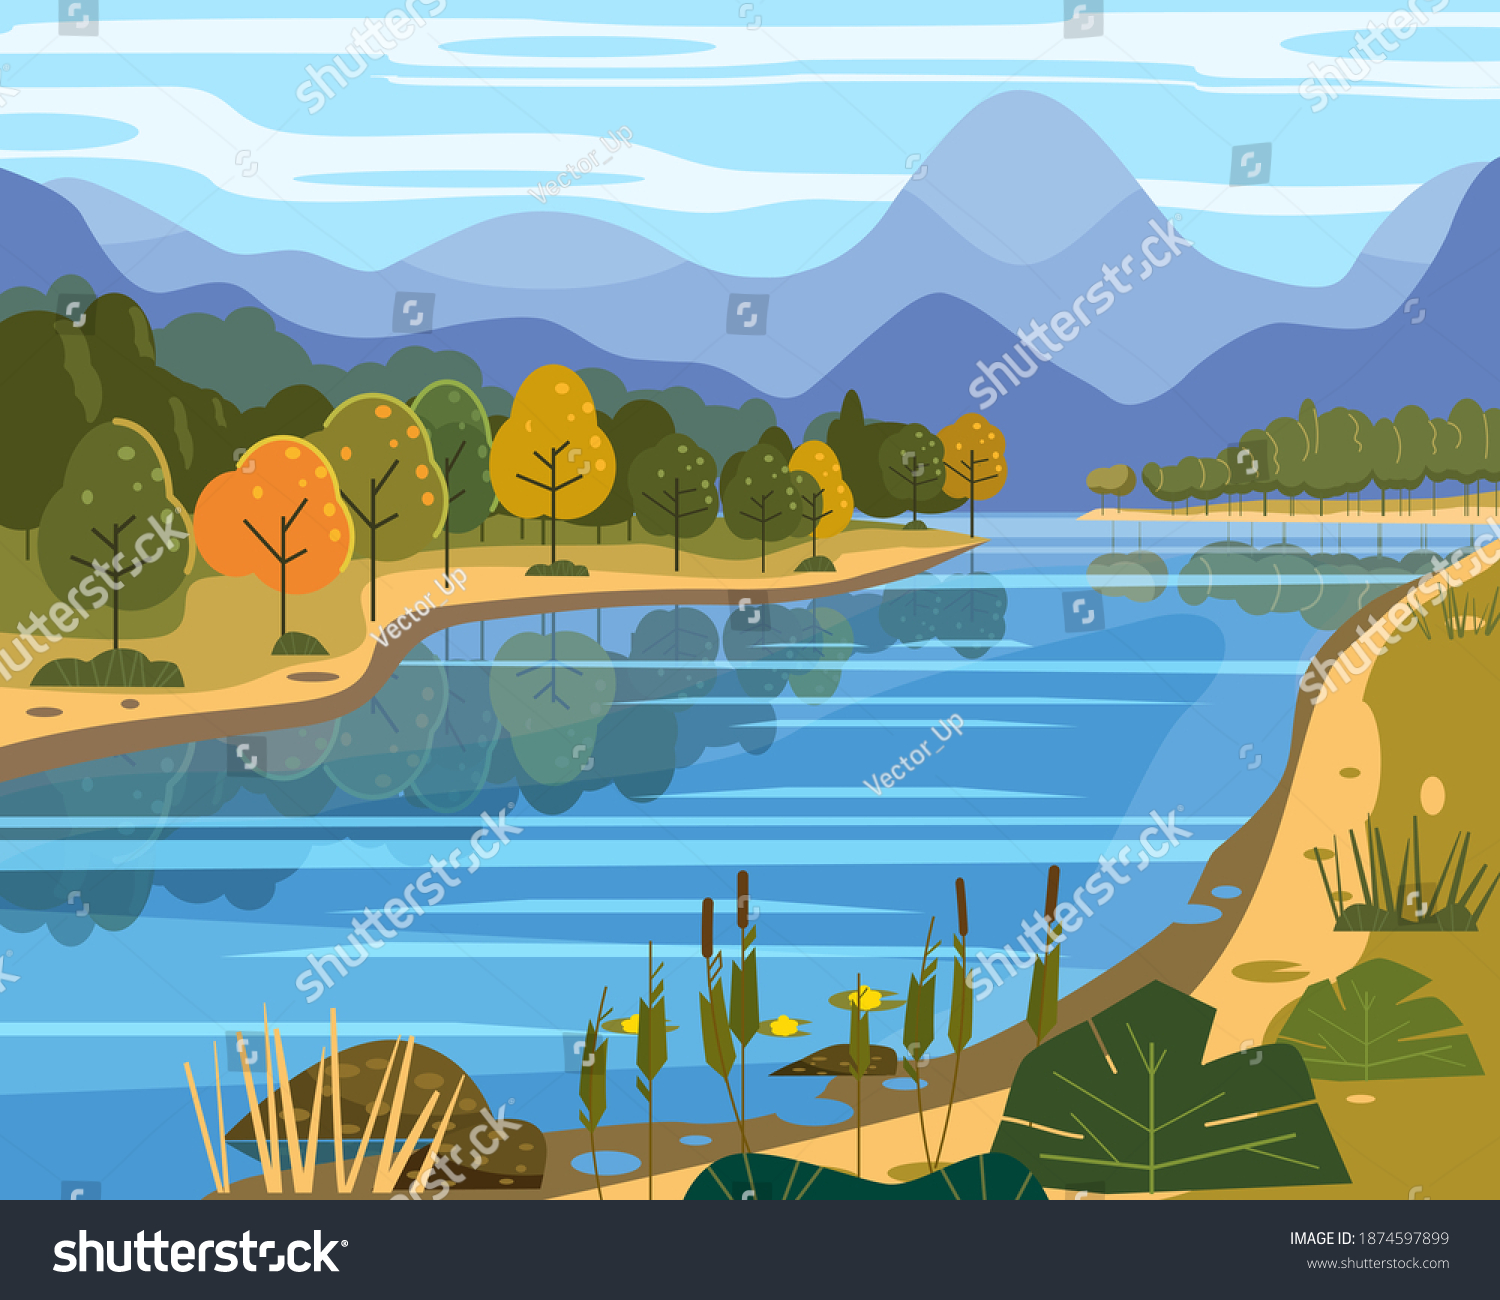 Landscape river flowing to mountains, hills. Coast autumn scenic forest, meadows. Vector illustration background poster banner trendy flat cartoon style